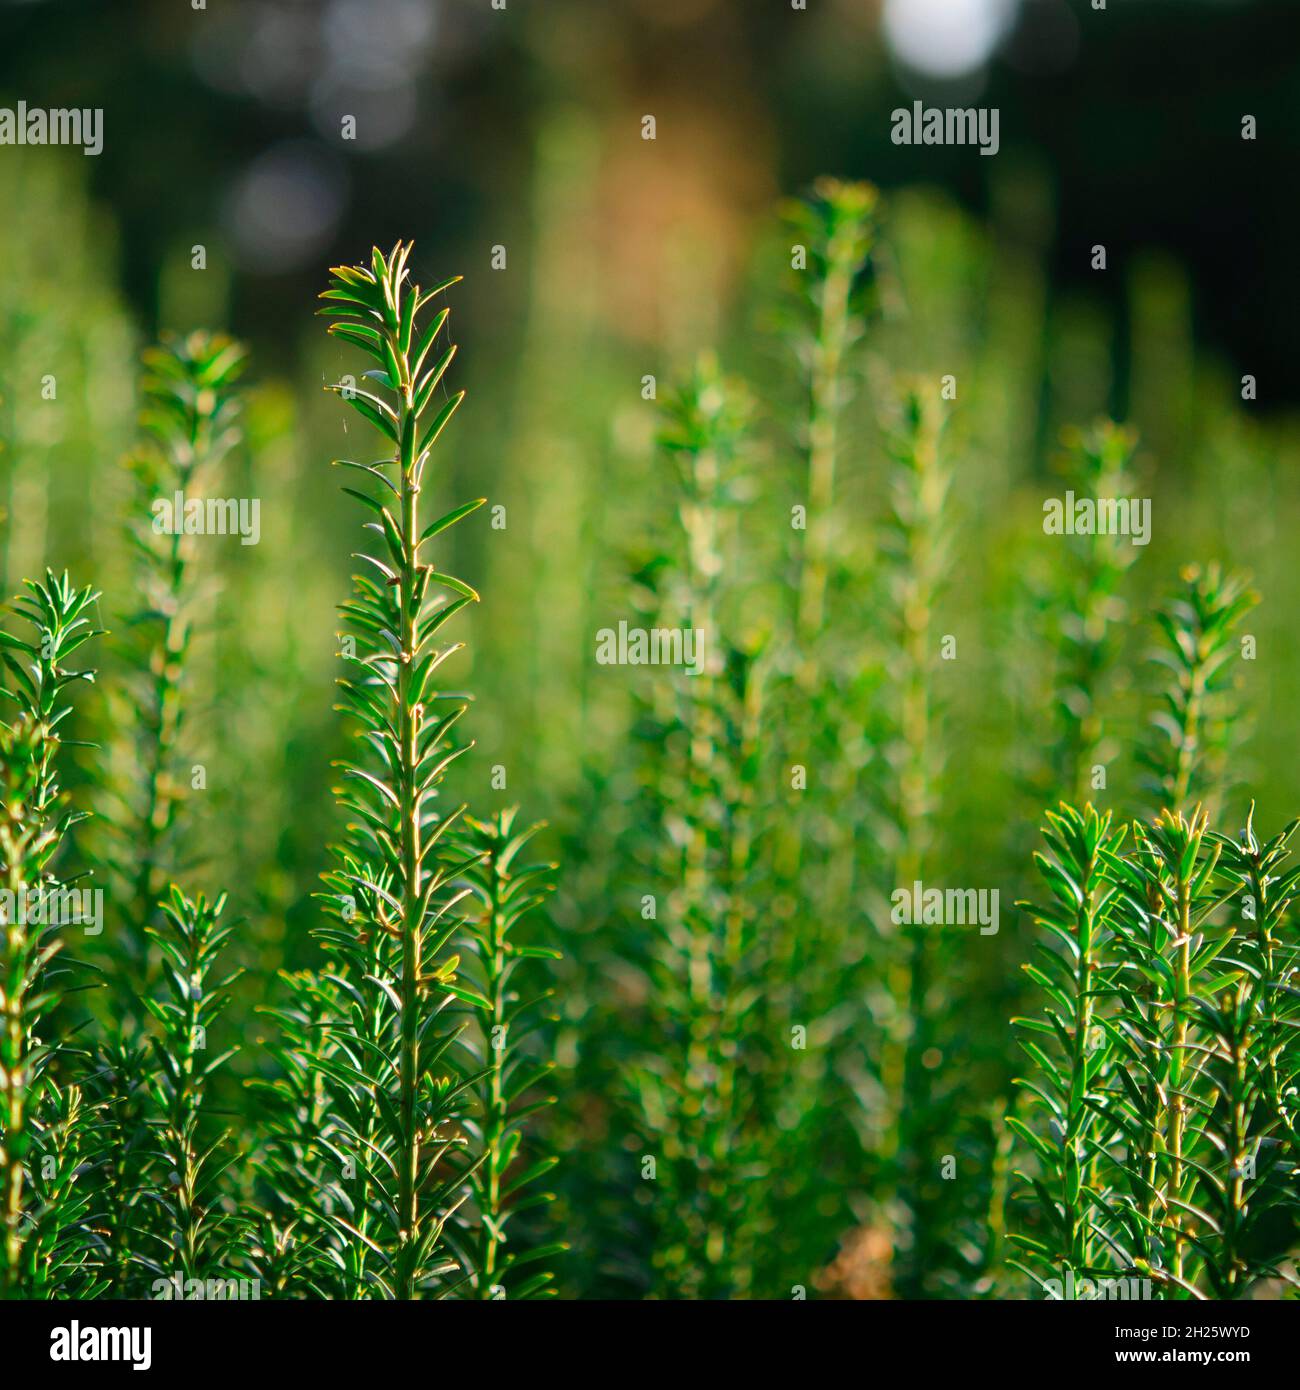 Vertical dark green with yellow stripes branches of yew Taxus baccata Fastigiata Aurea as natural background Stock Photo